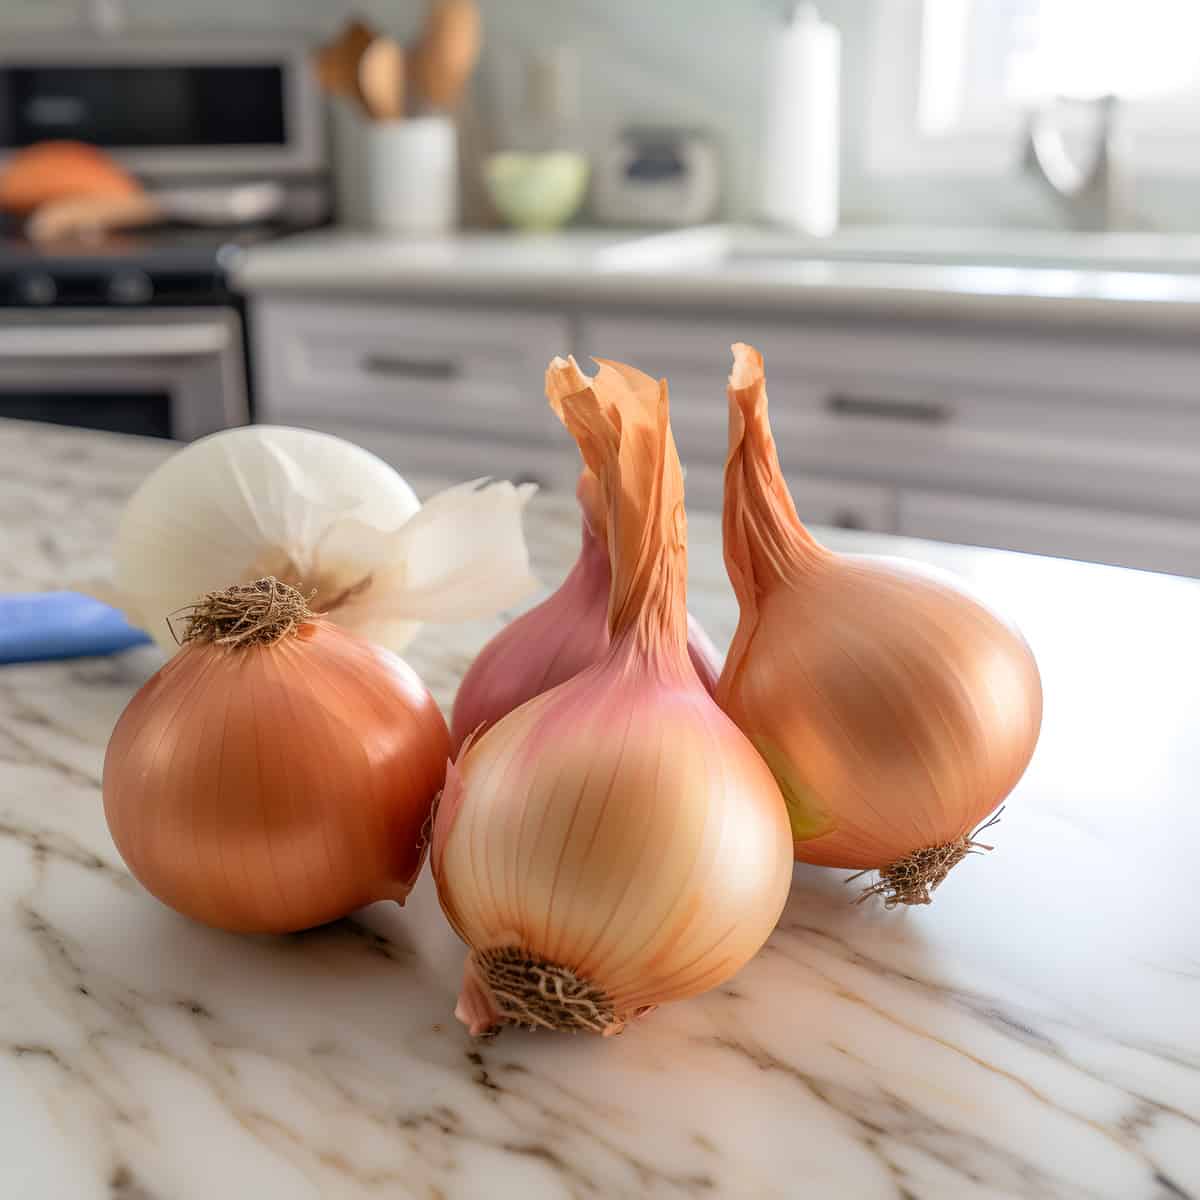 Shallot on a kitchen counter